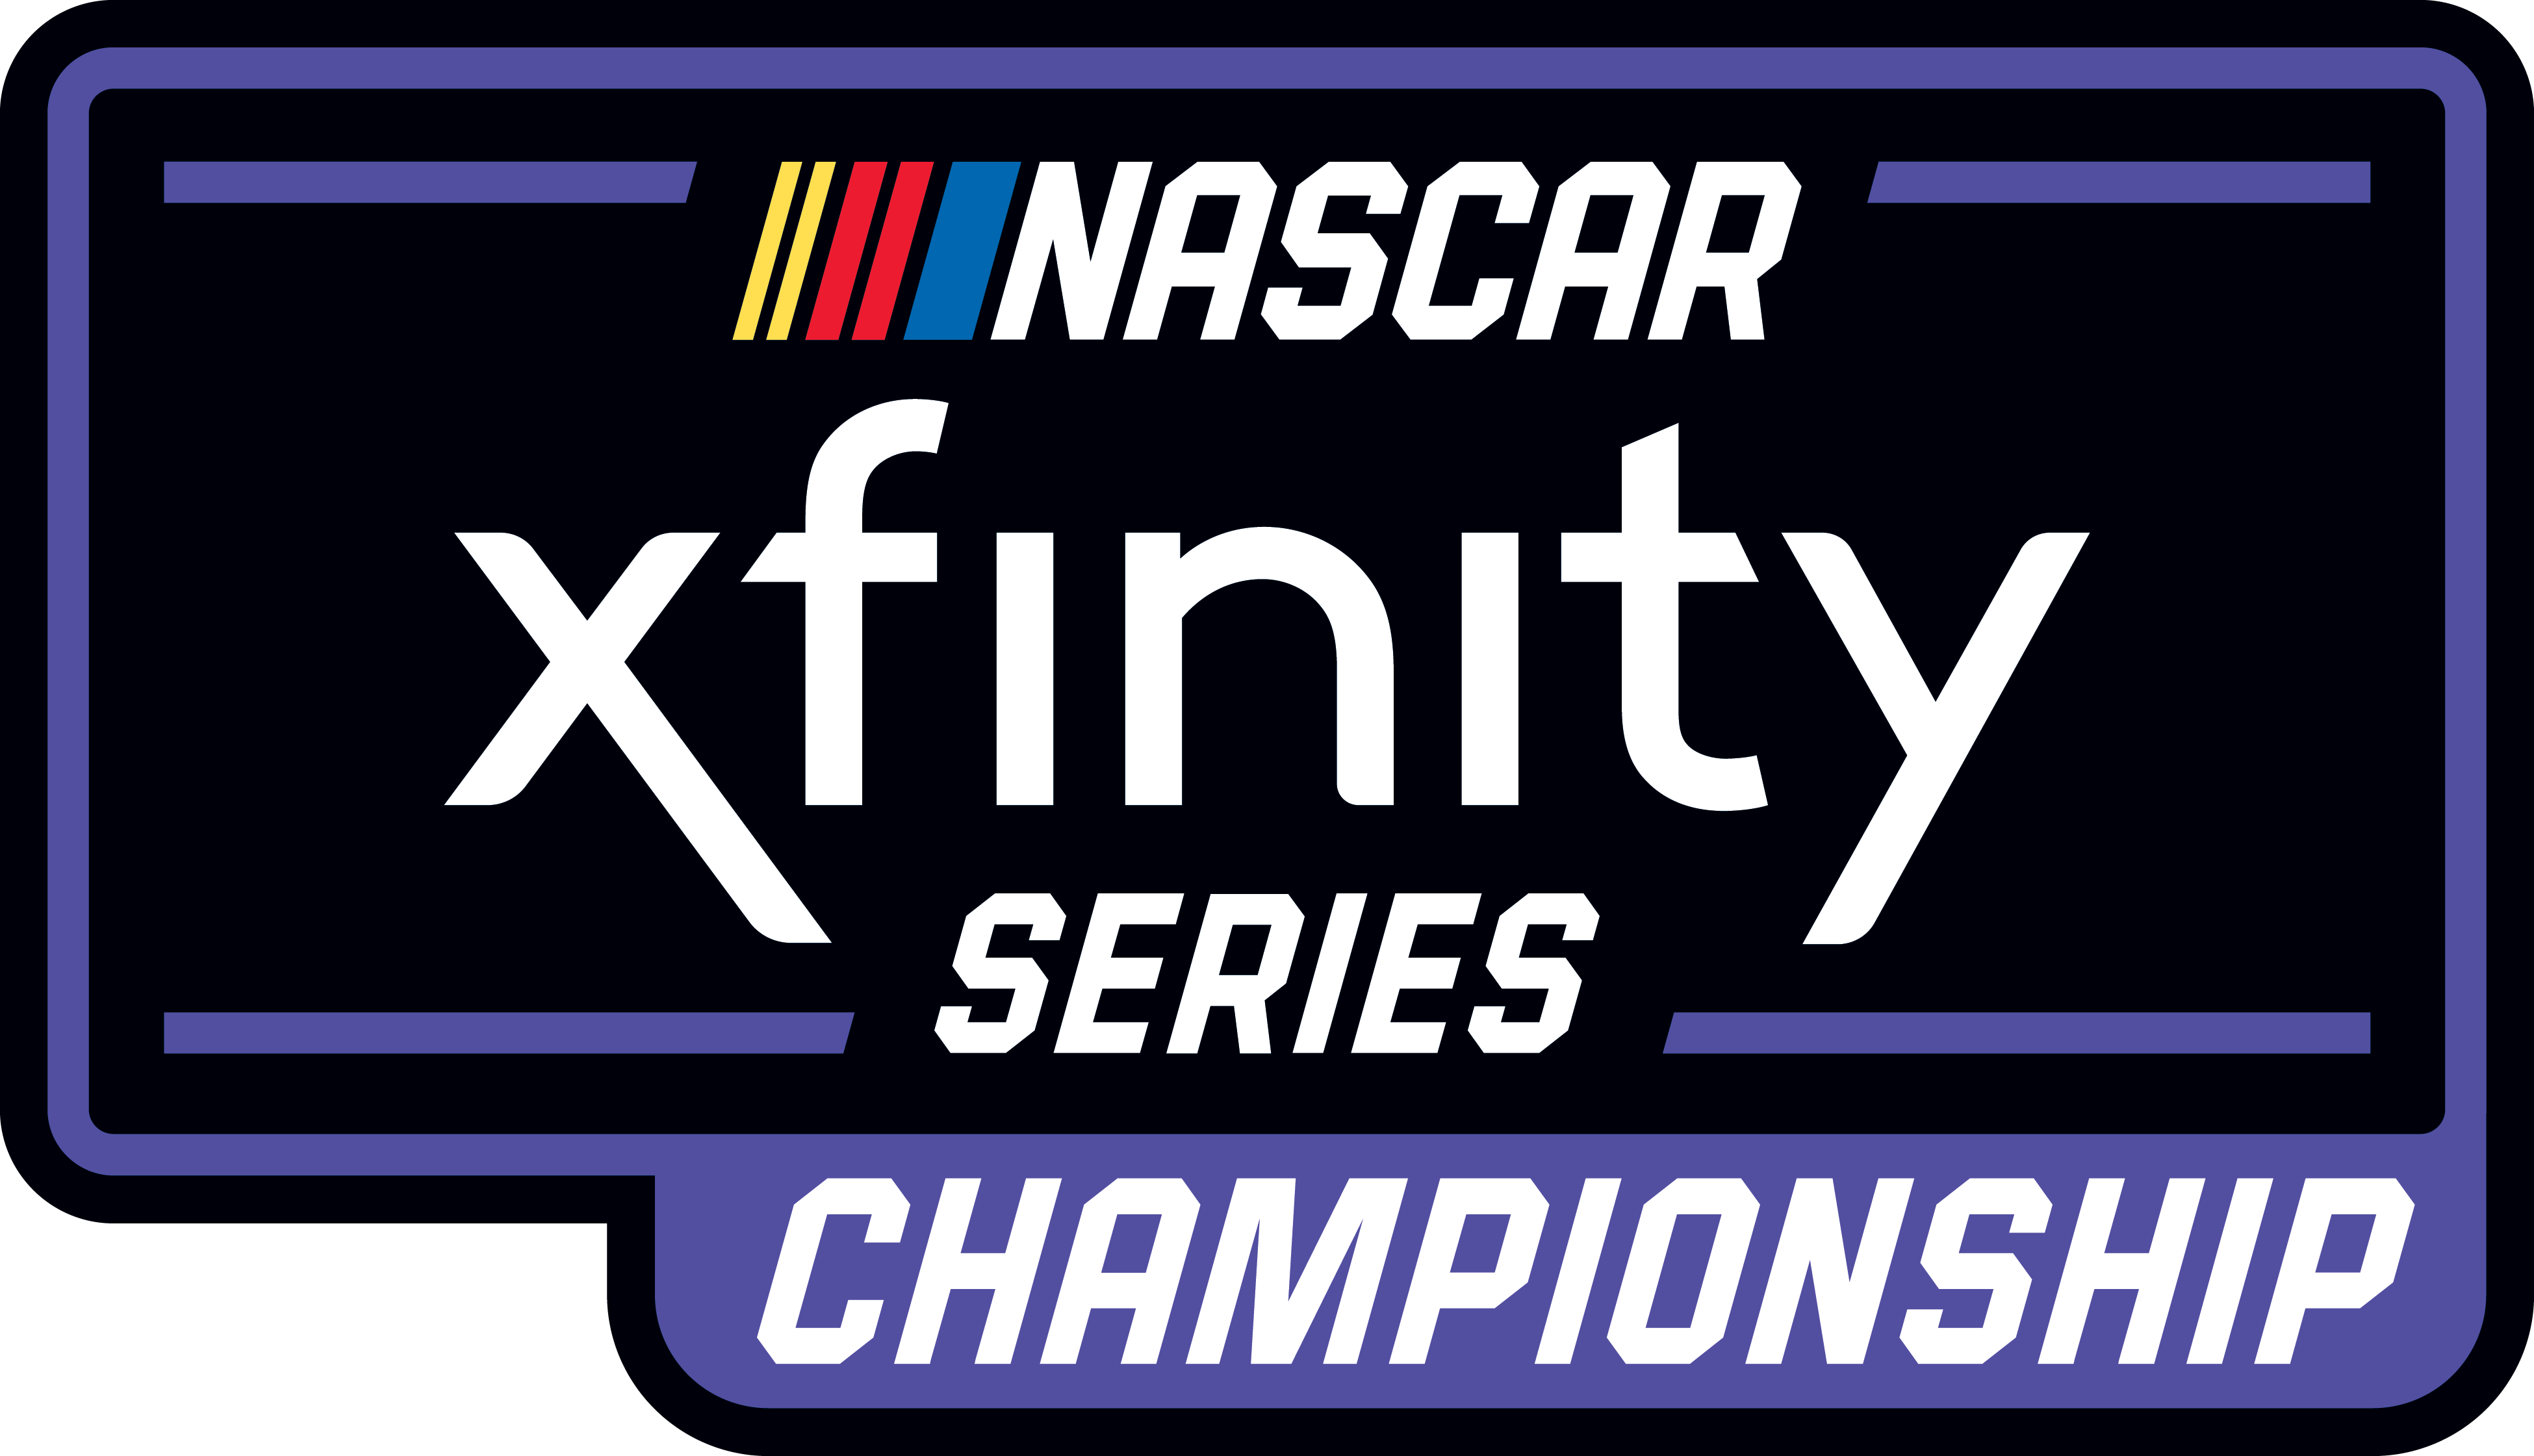 CHEVROLET AT PHOENIX: NASCAR Xfinity Series Post-Race Notes and Quotes